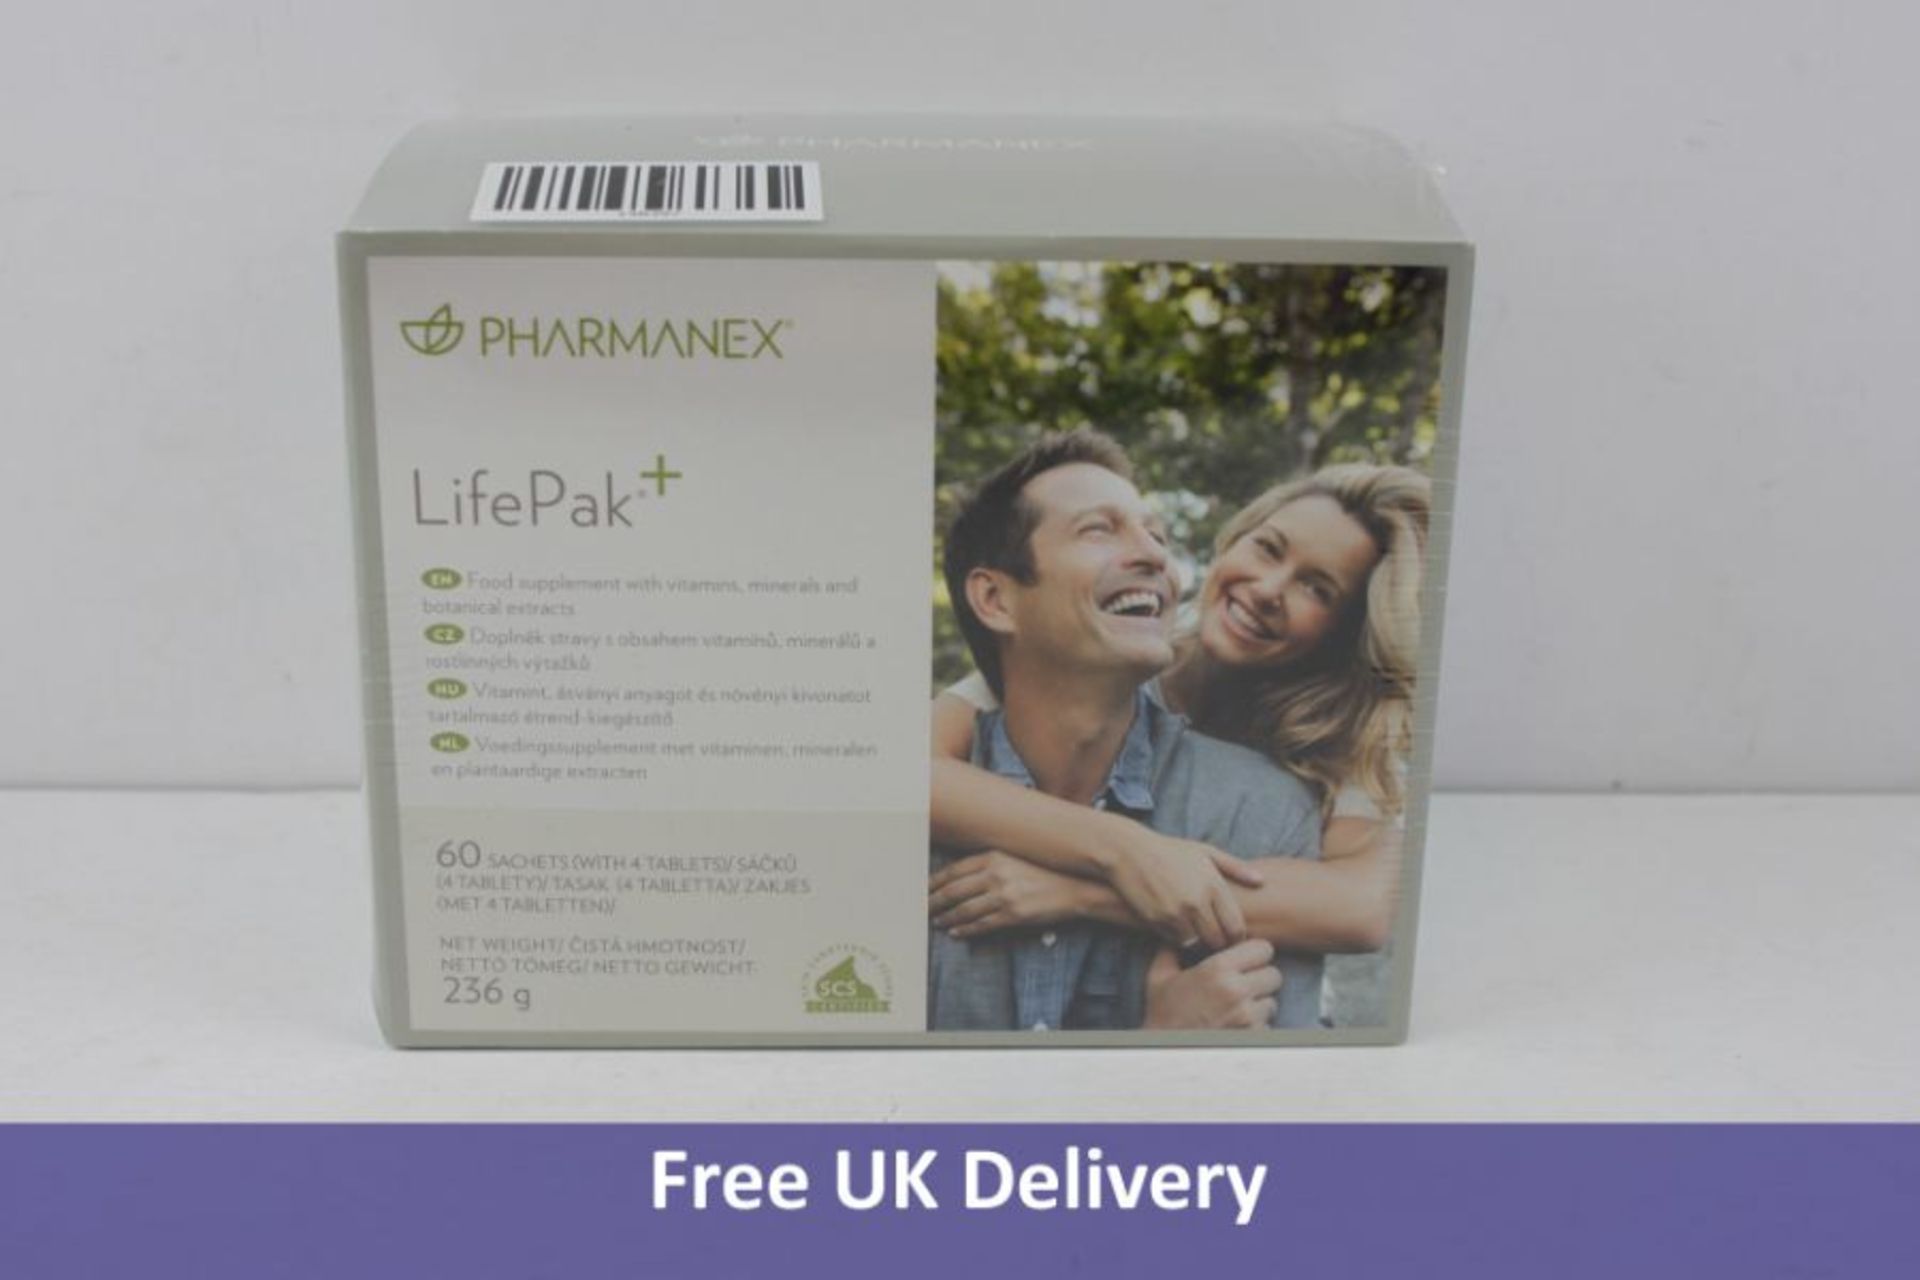 Pharmanex LifePak + 60 Sachets (WITH 4 TABLETS) vitamins, minerals, and botanical extracts